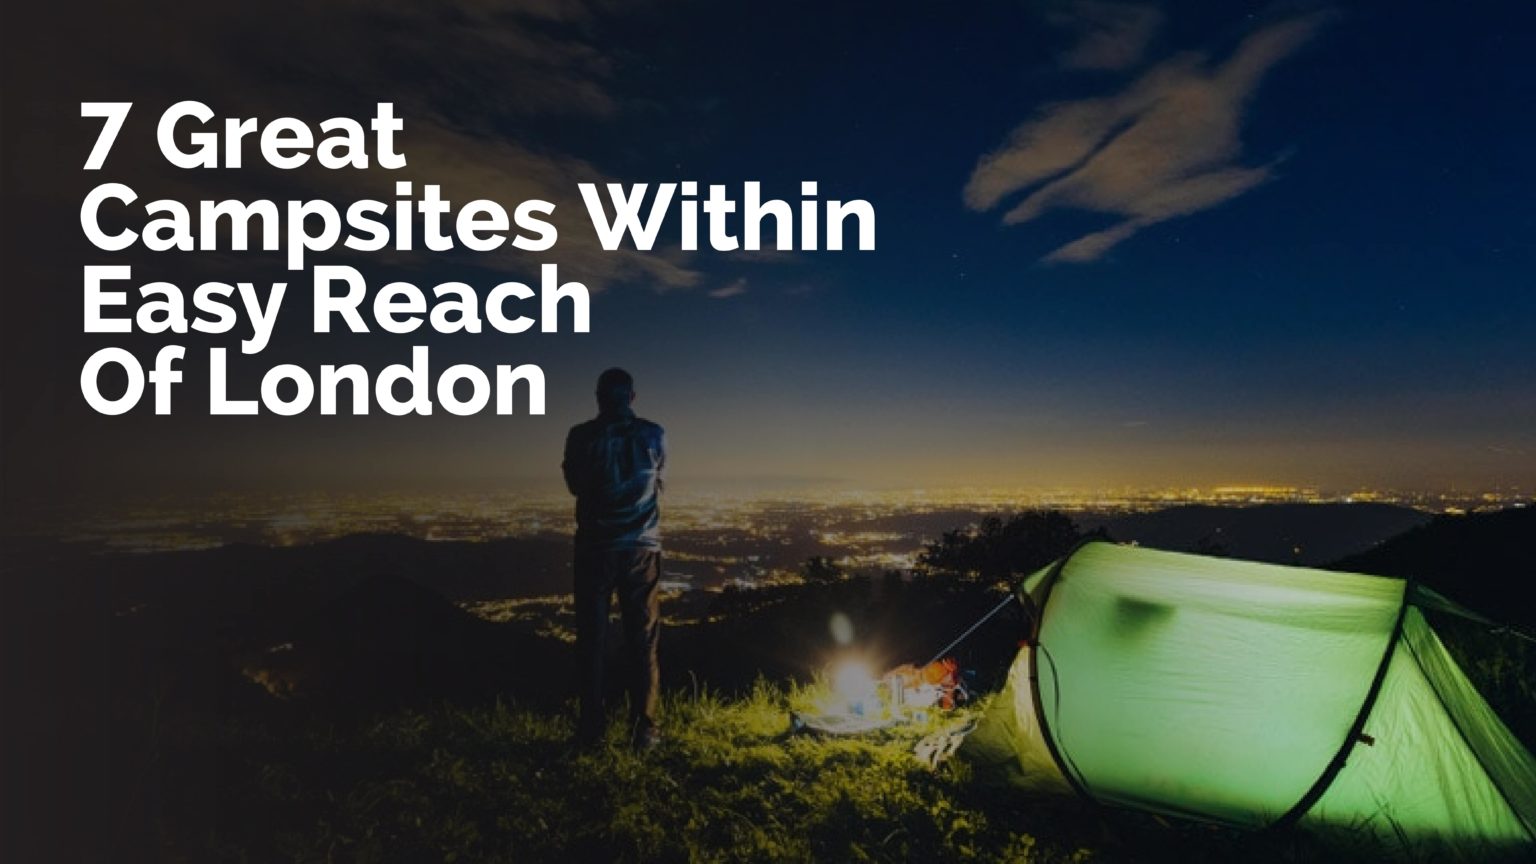 7 Great Campsites Within Easy Reach Of London